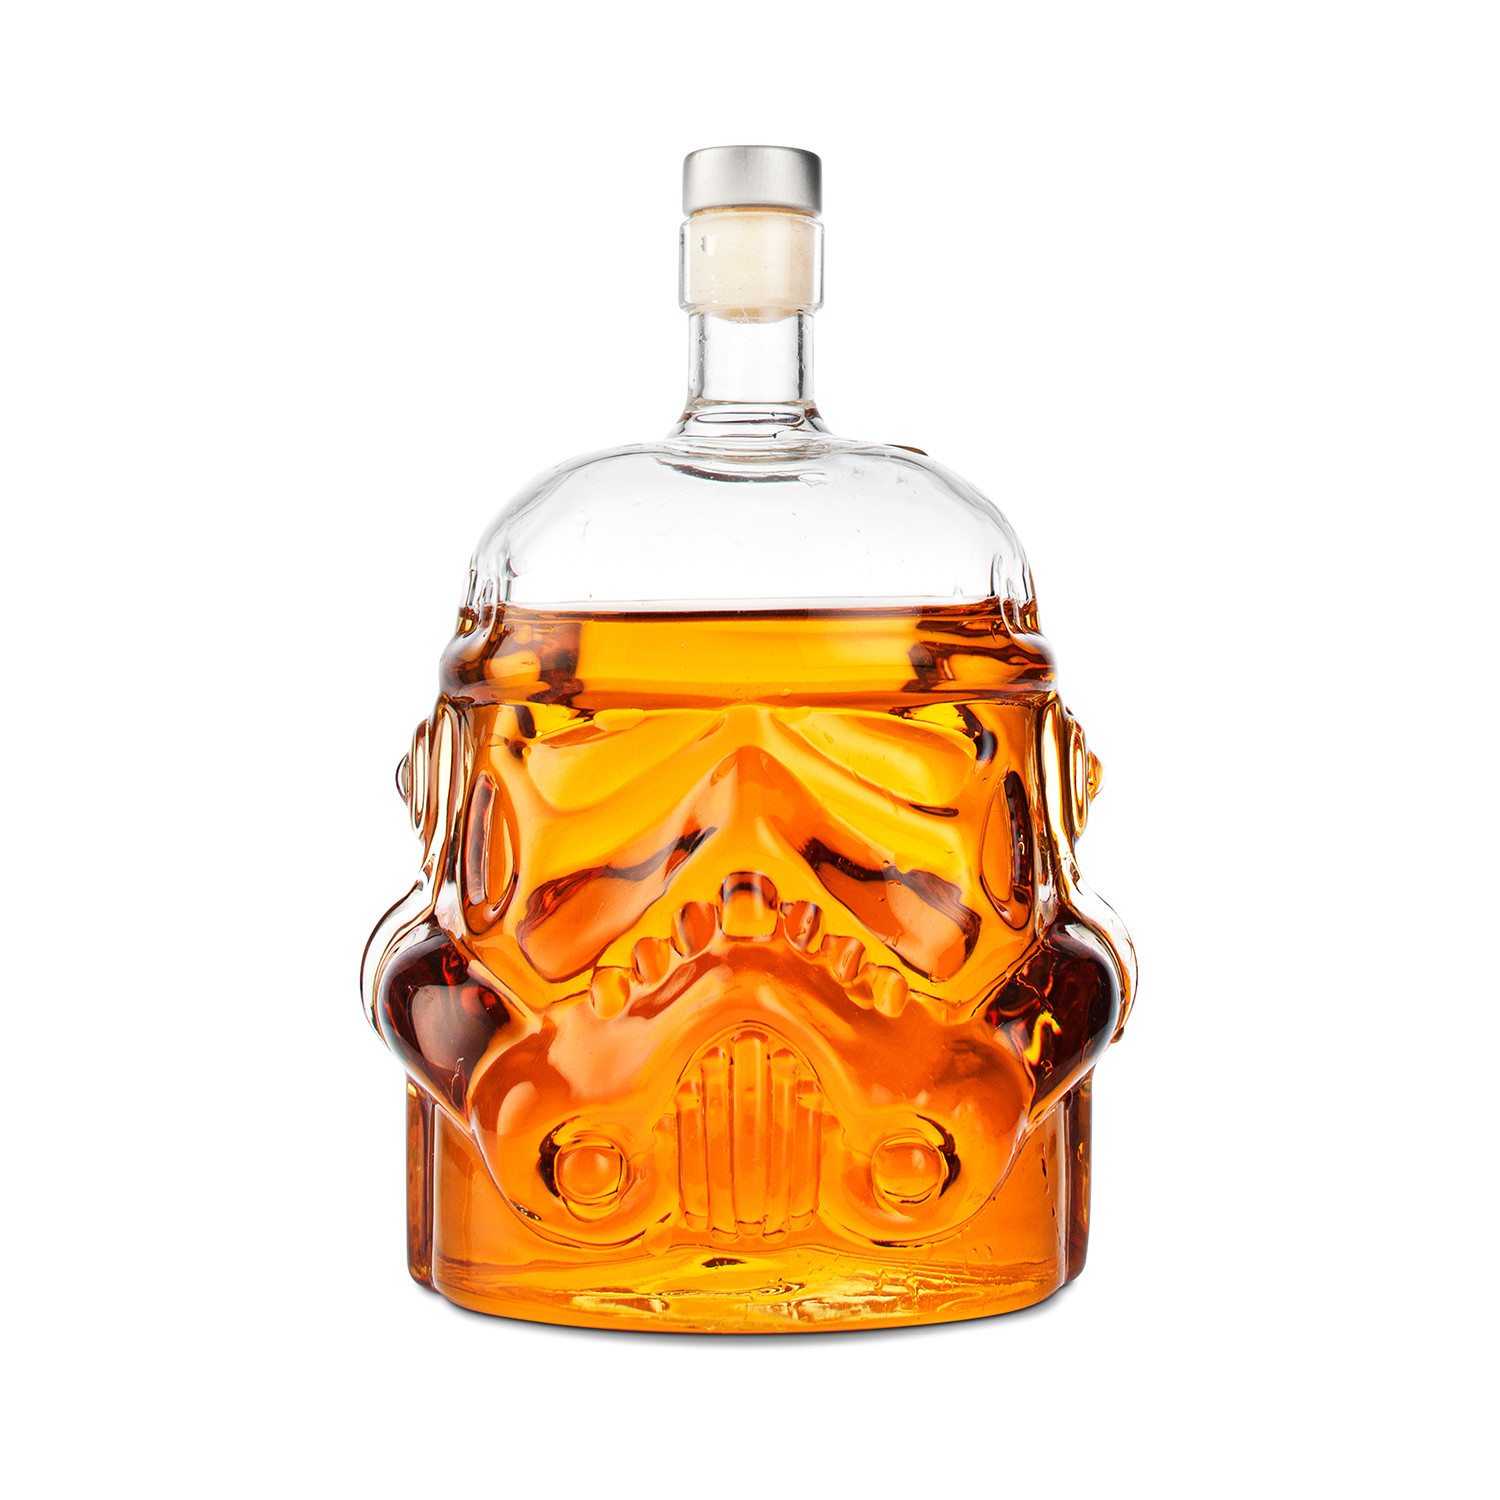 Star Wars Storm Trooper Whiskey Decanter + 2 Shot Glasses - The Wine Savant  - Touch of Modern